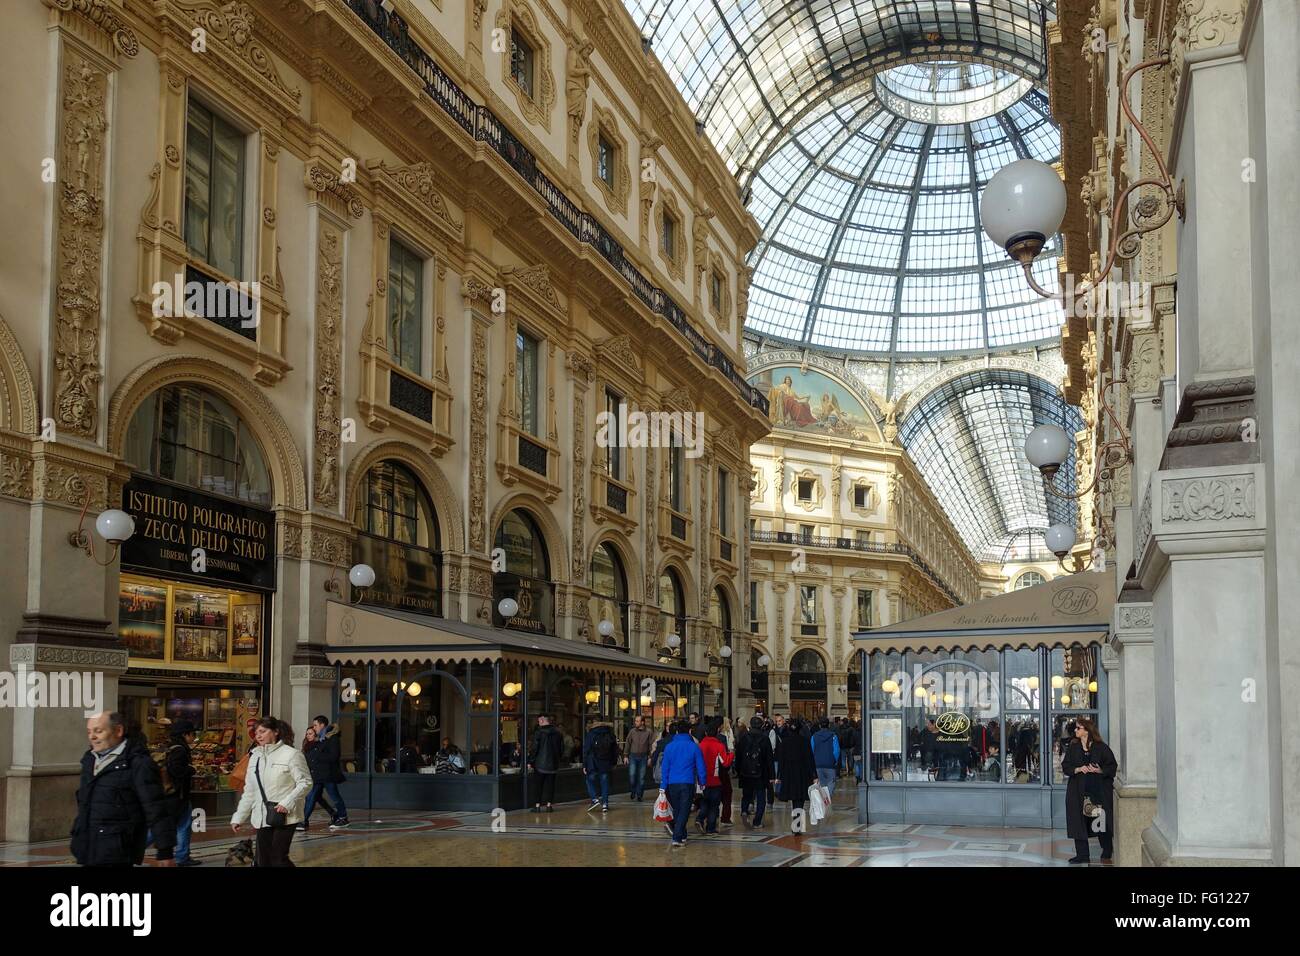 Italy: Galleria Vittorio Emanuele II, seen from South entrance. Photo from 31. January 2016. Stock Photo